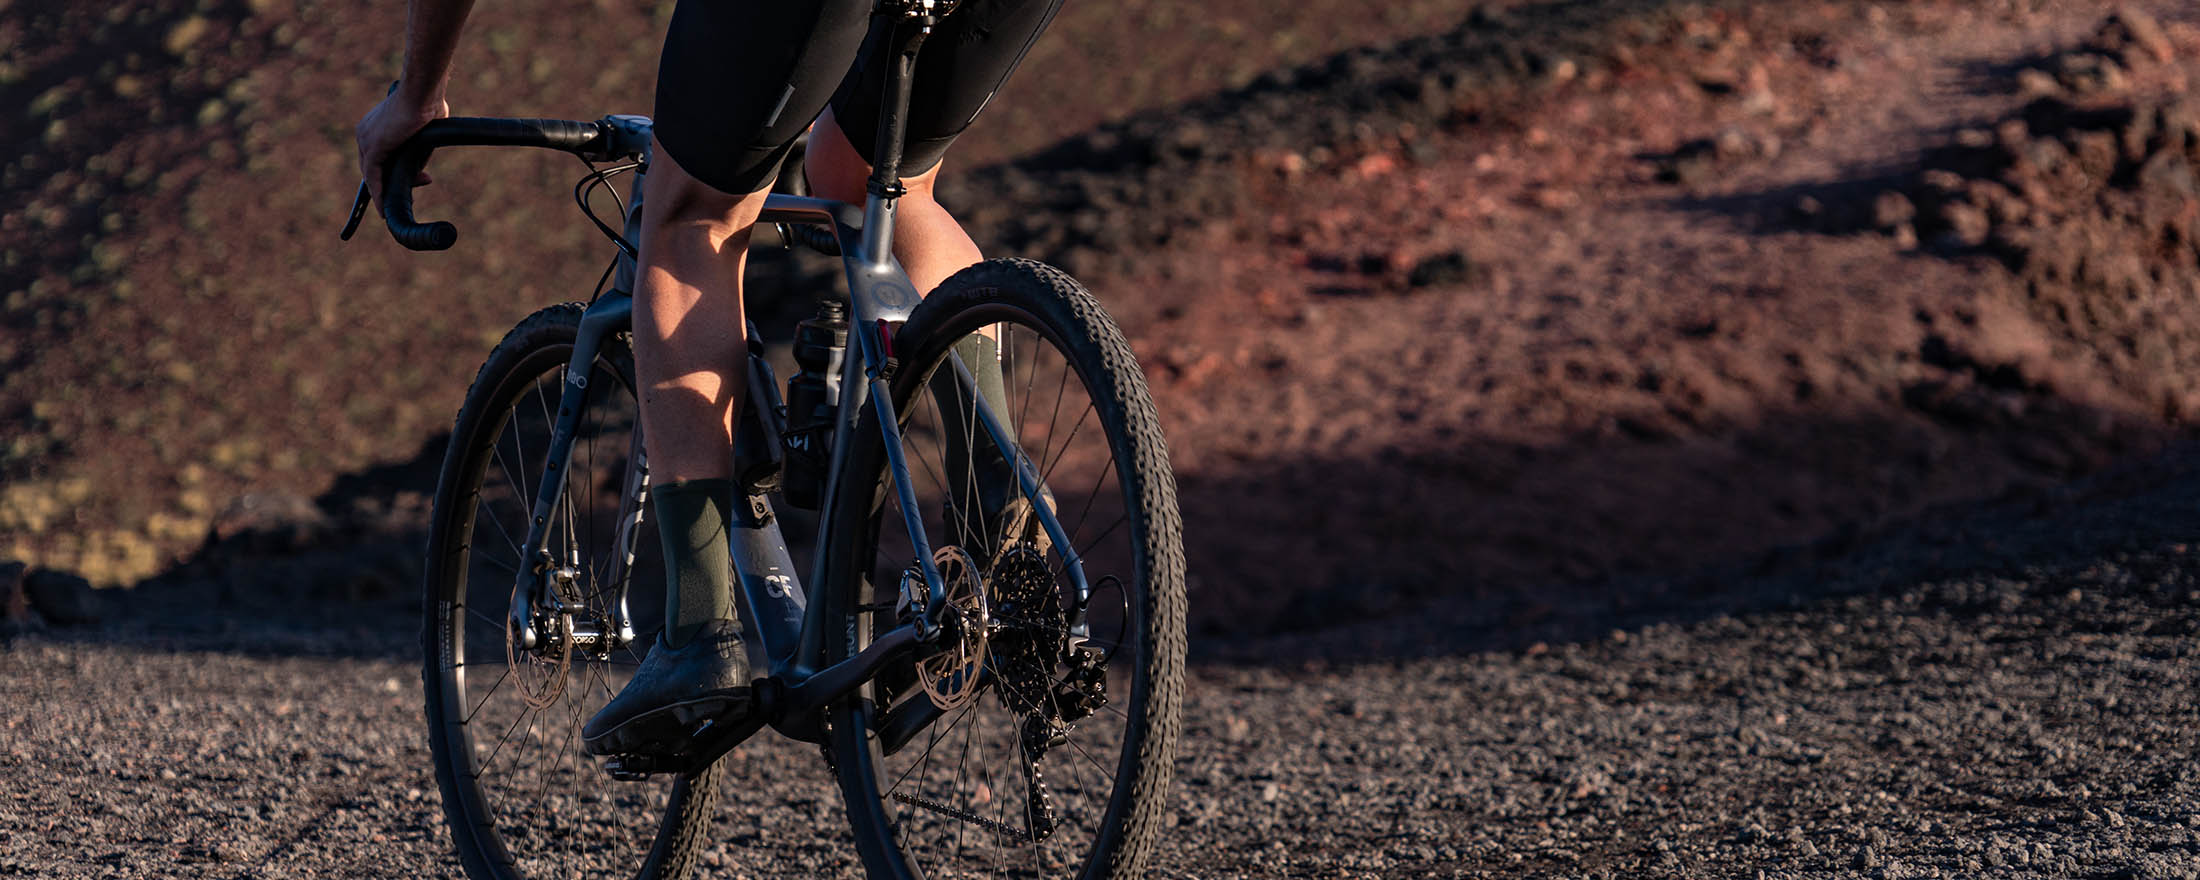 Gravel cyclists wear khaki socks to avoid dirt and stains during the ride